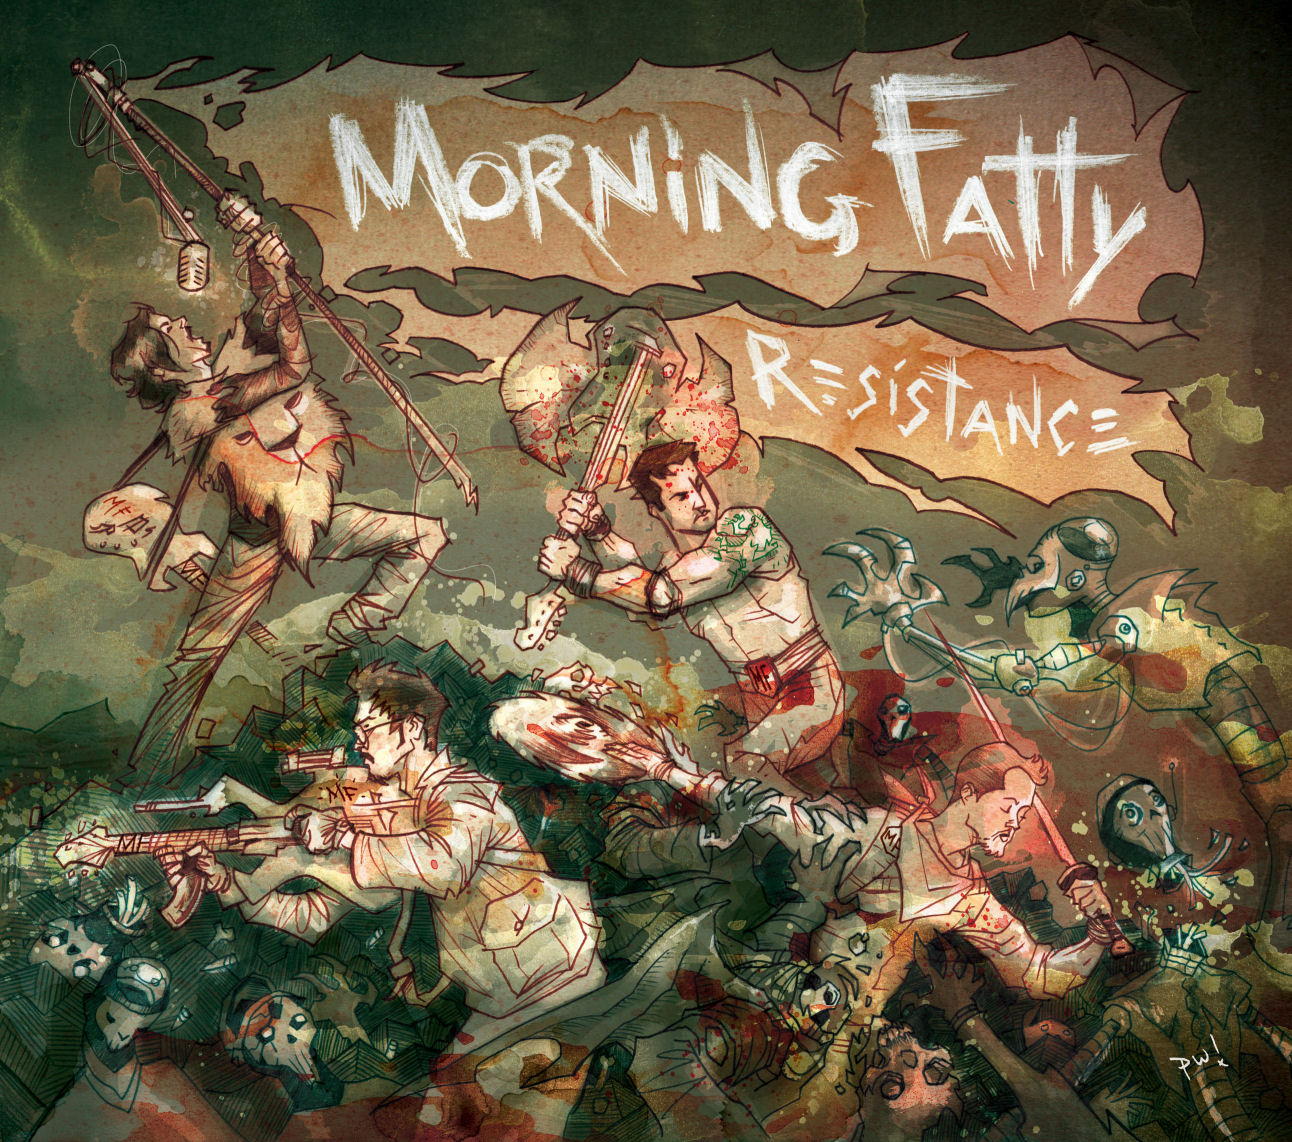  Morning Fatty – Some Songs From Resistance (¿)